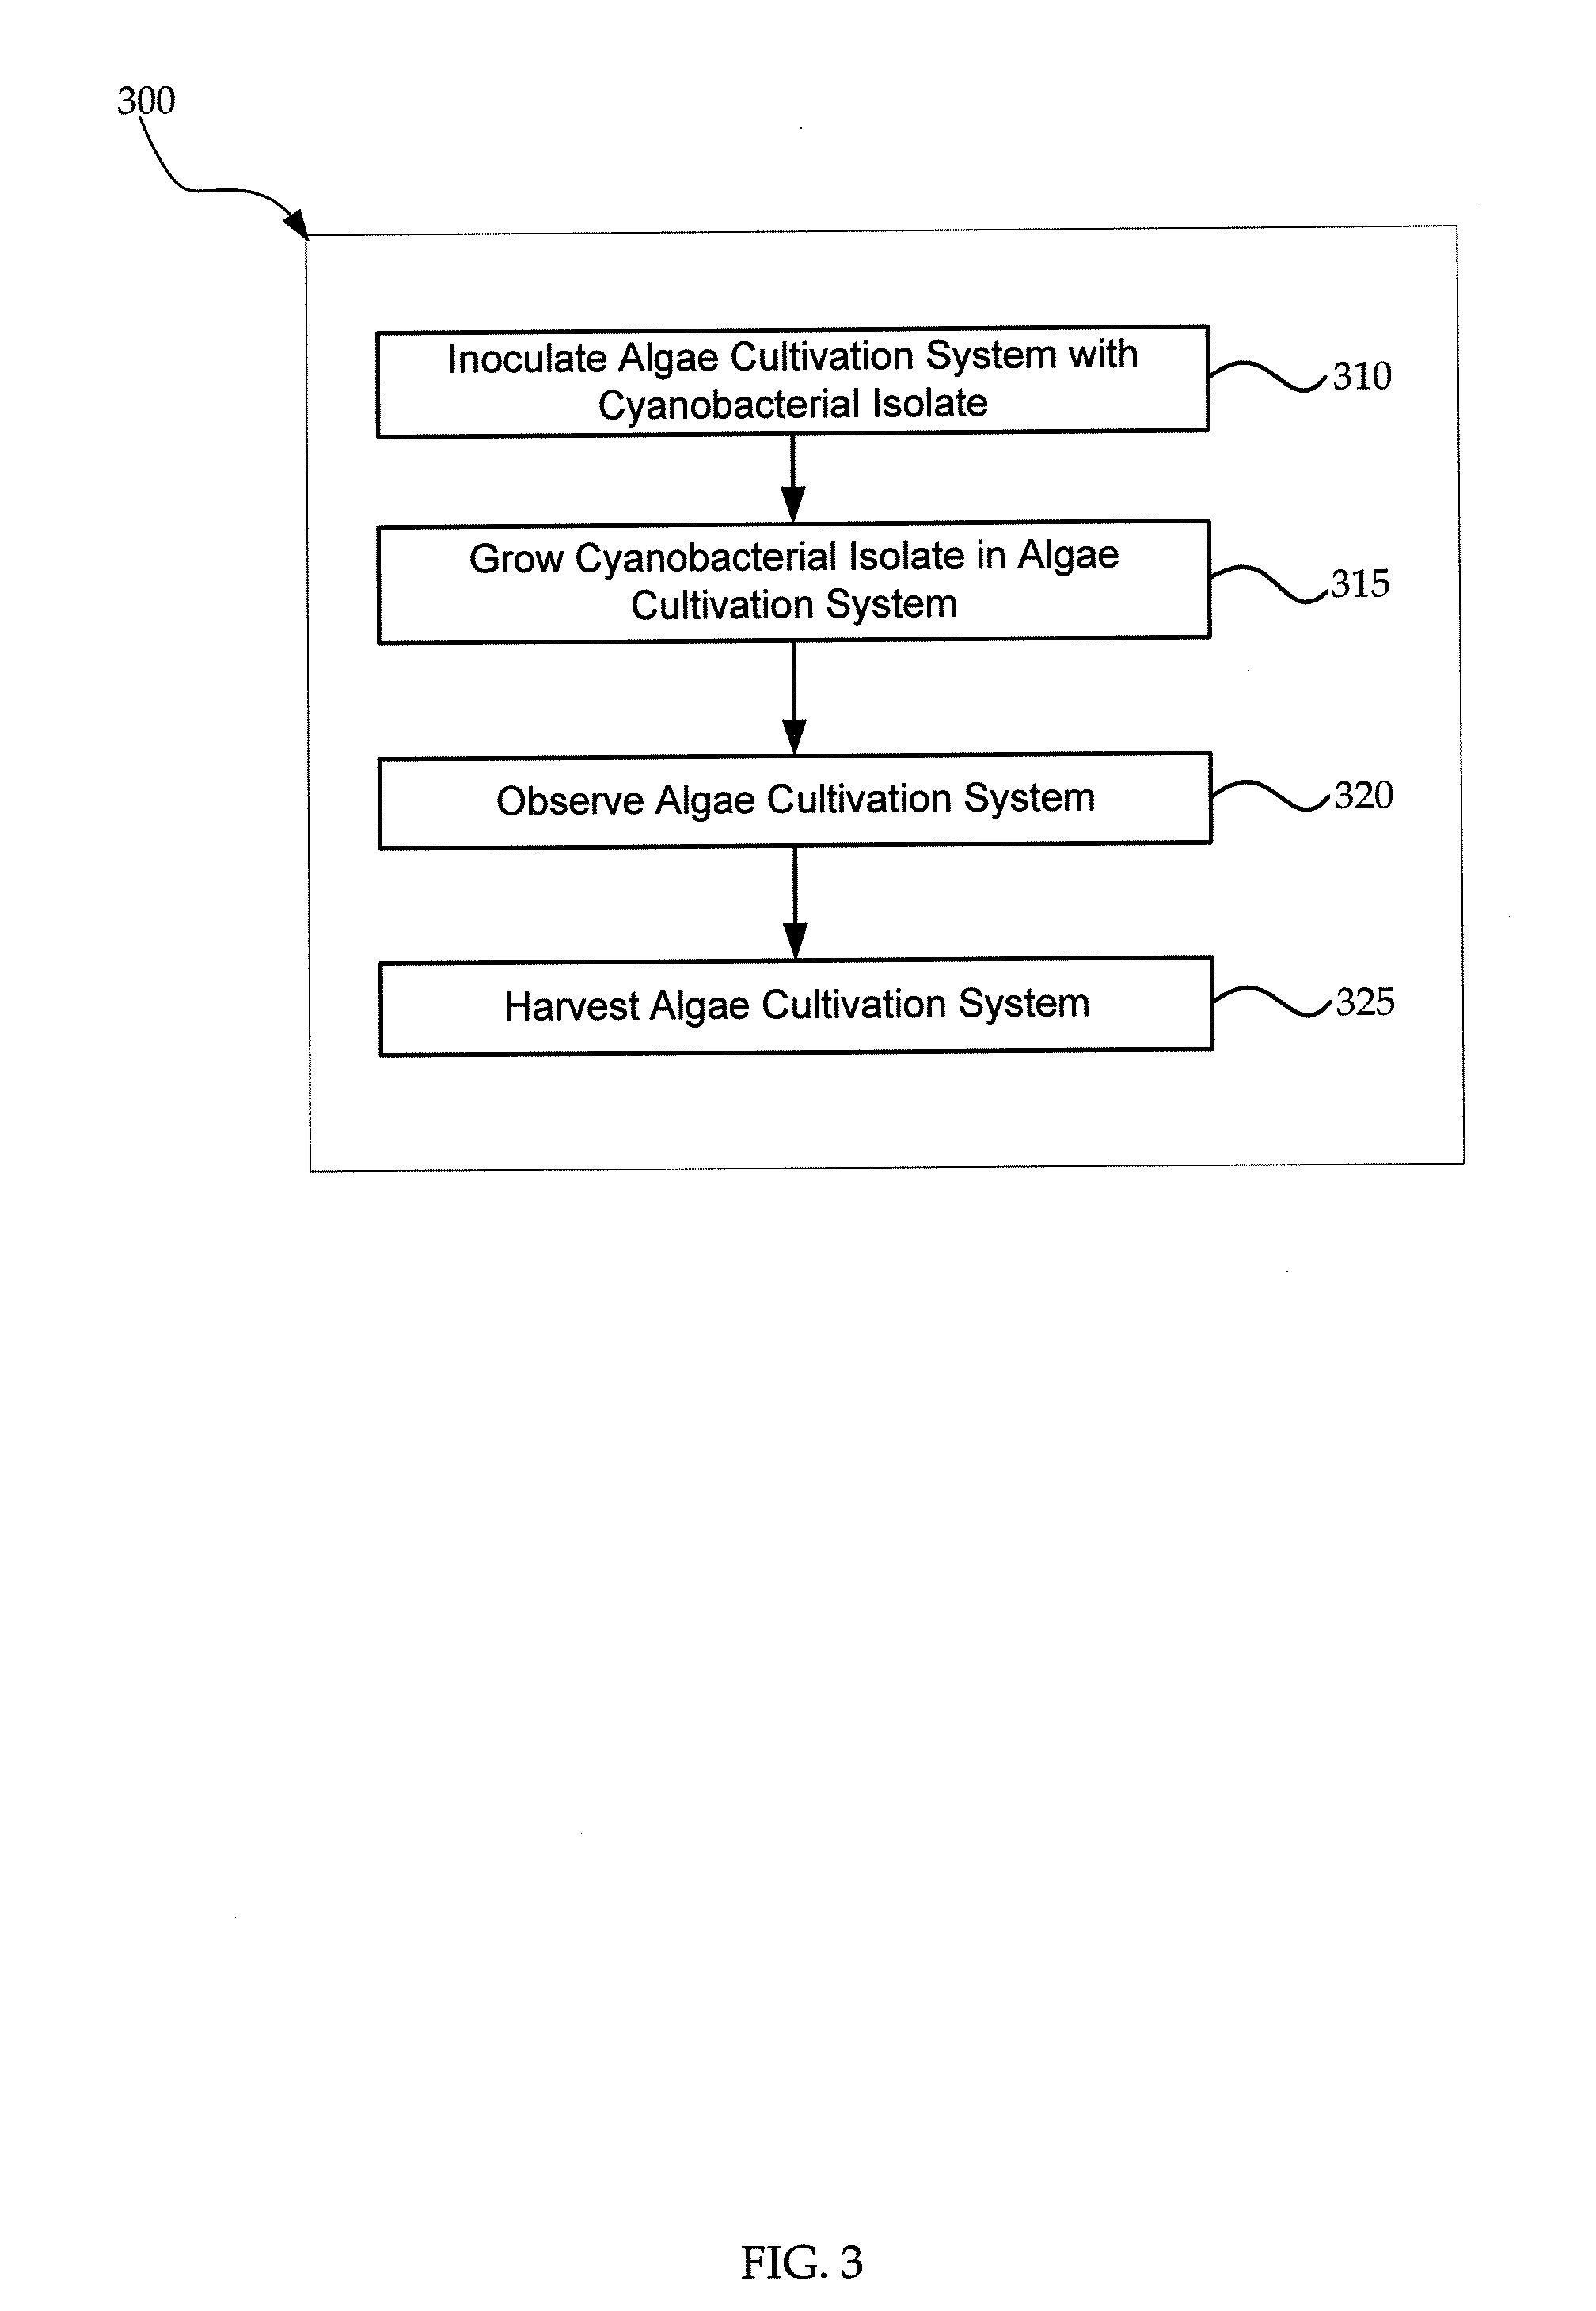 Cyanobacterial Isolates Having Auto-Flocculation and Settling Properties